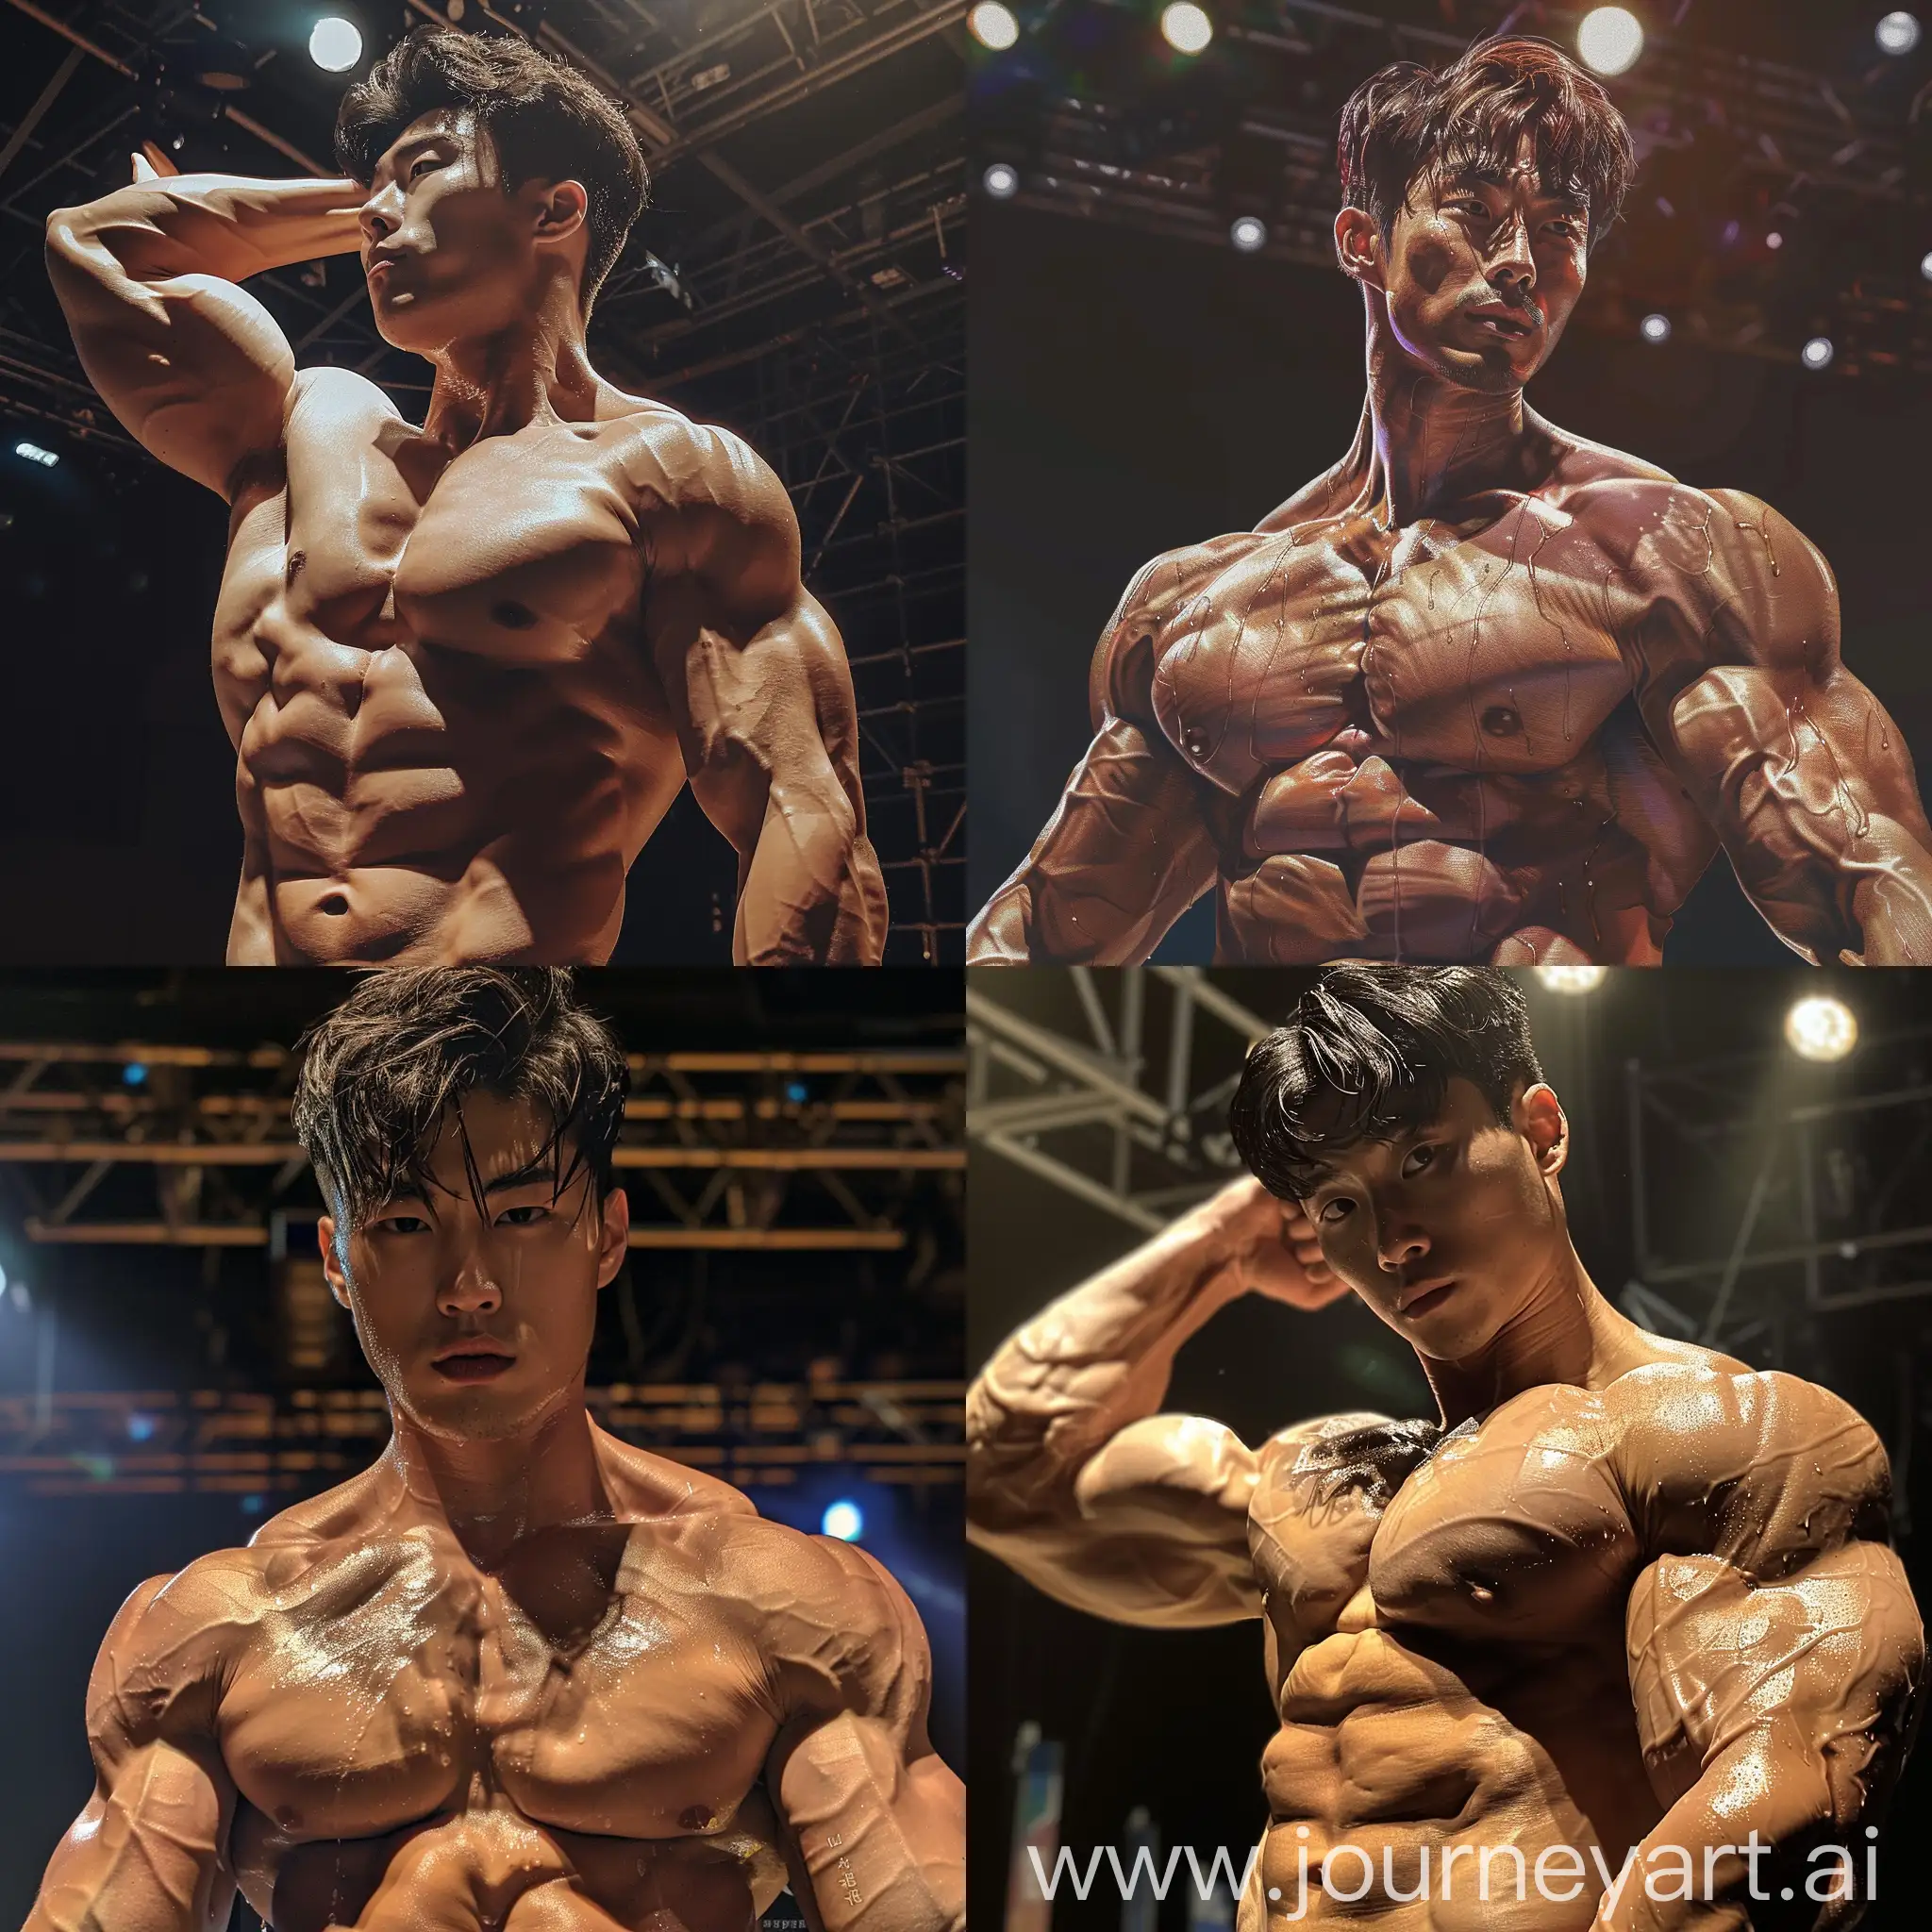 One Korean man  idol flex is hard woshboard  sculpted  abs.The image is taken with a close camera, enhancing the details of  face and body. The background is the stage.